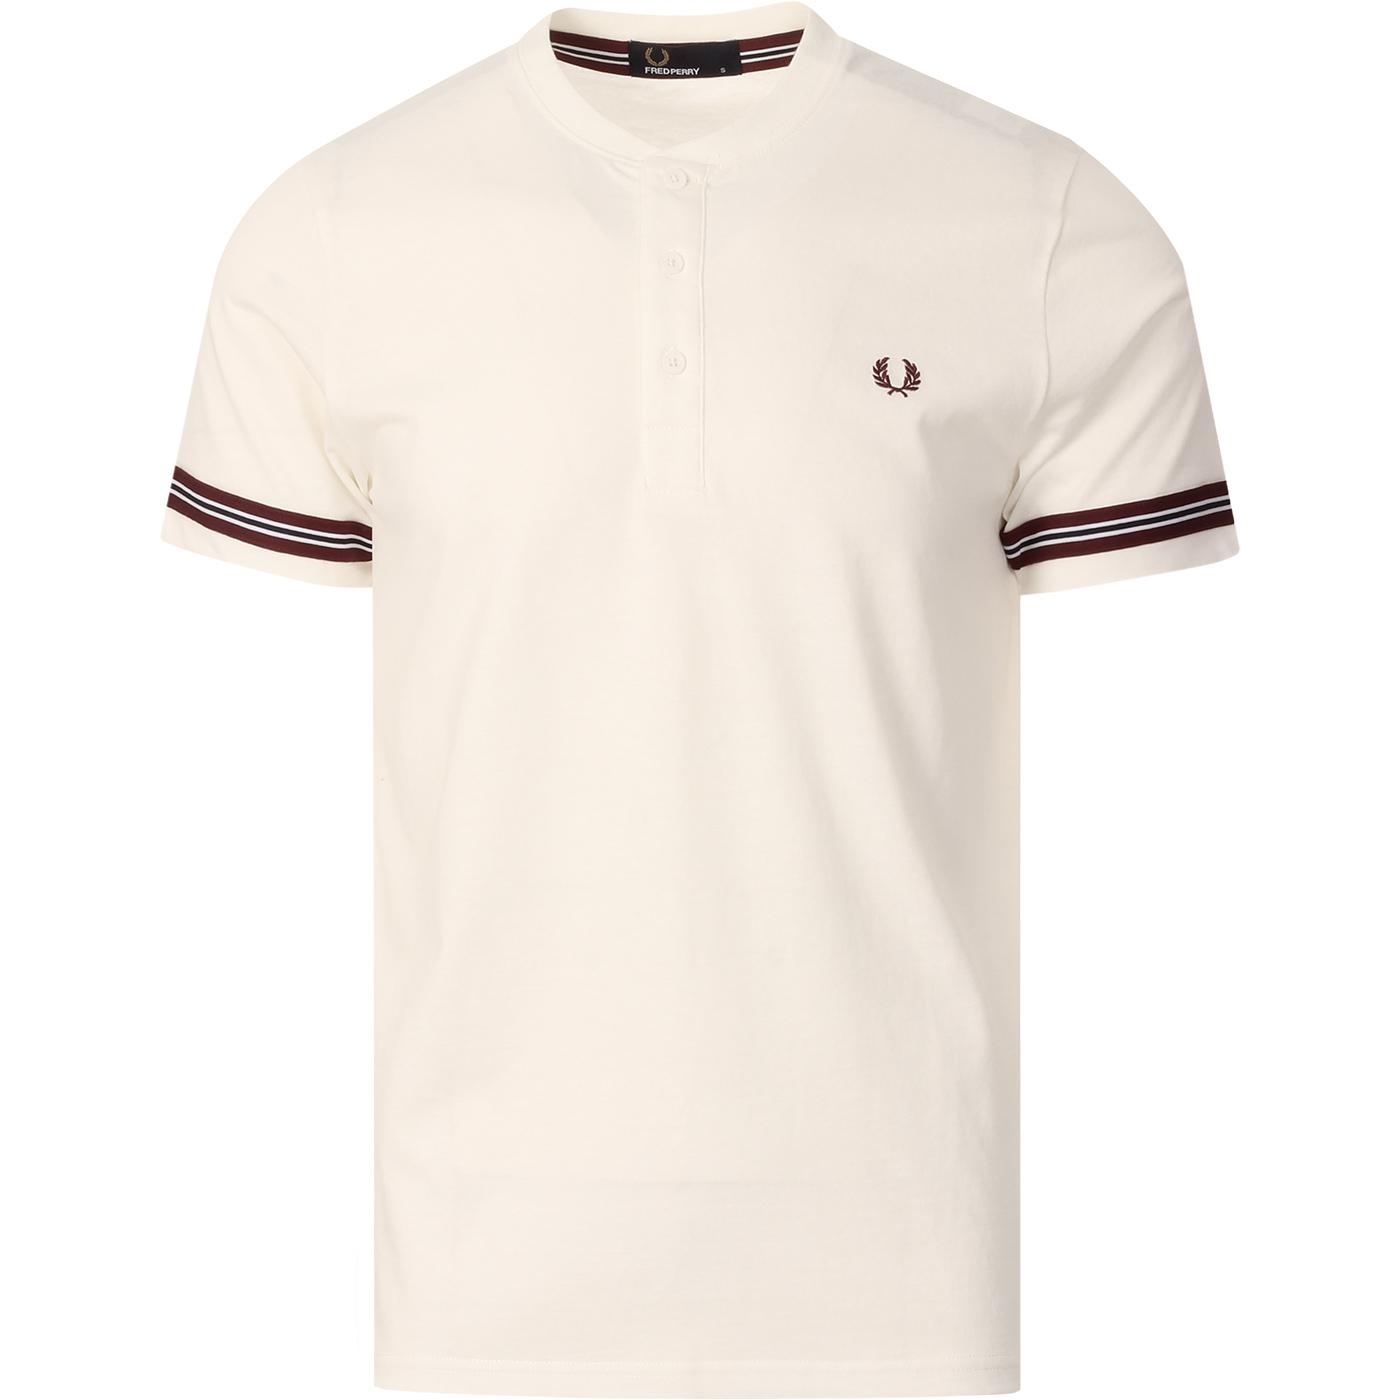 FRED PERRY Retro Mod Tipped Sleeve Henley Tee